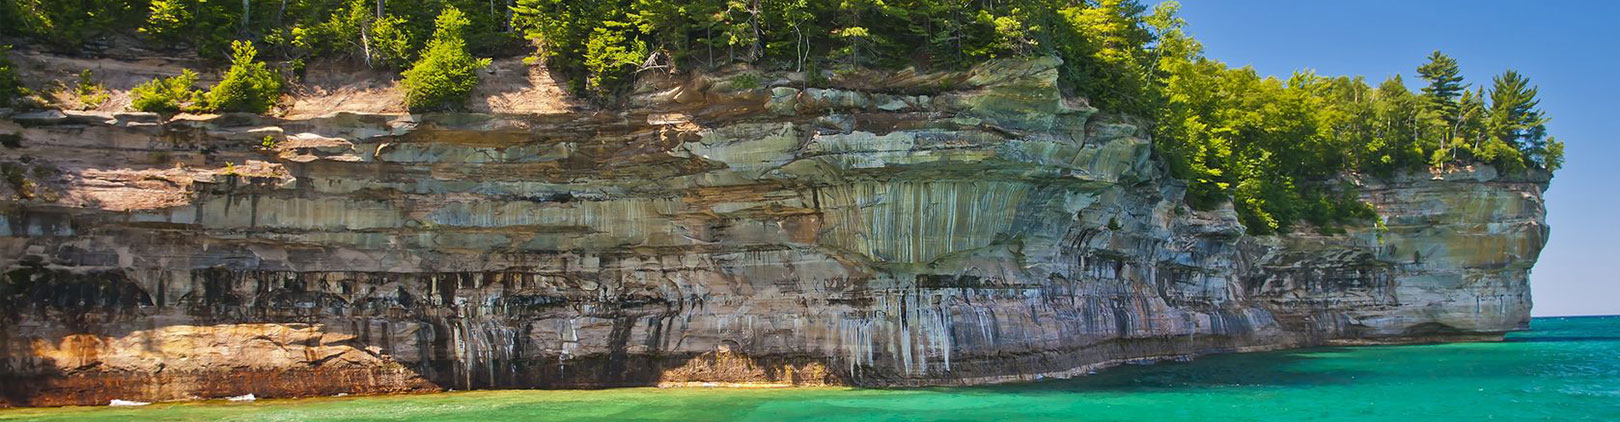 stony cliff face with trees on top above teal waters